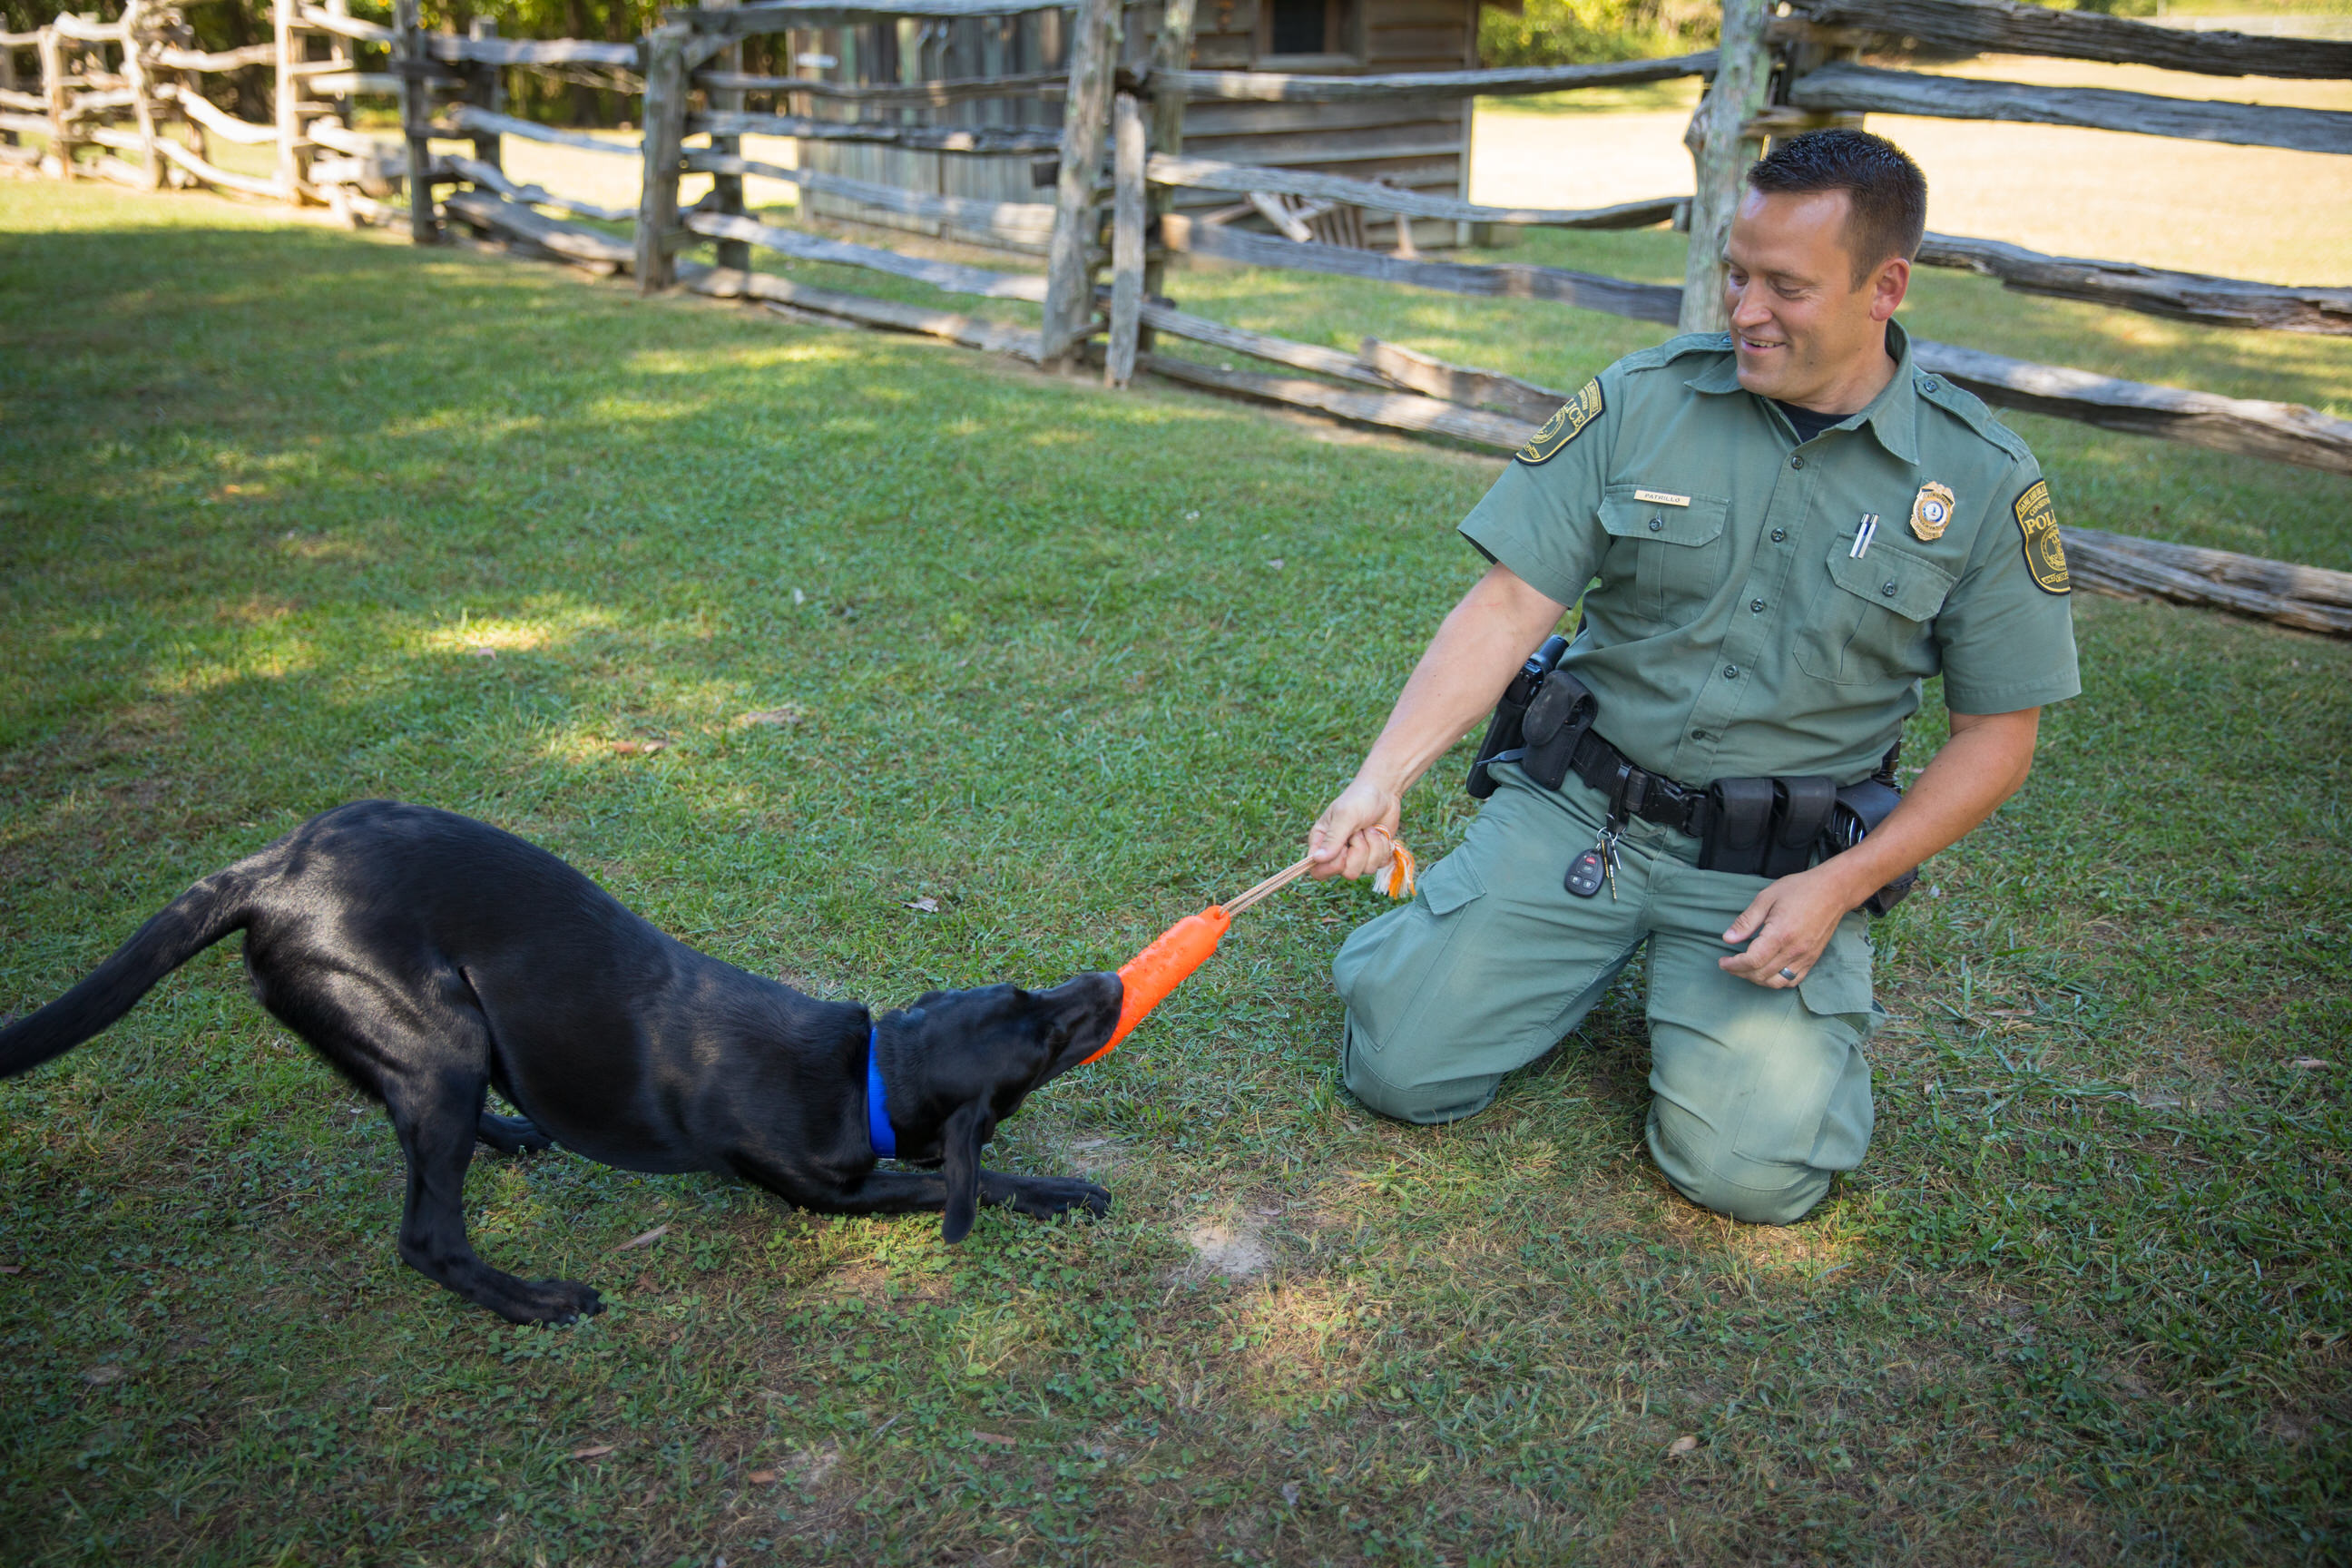 CPO Patrillo playing tug of war with an orange toy with K9 Bailey after a training session.